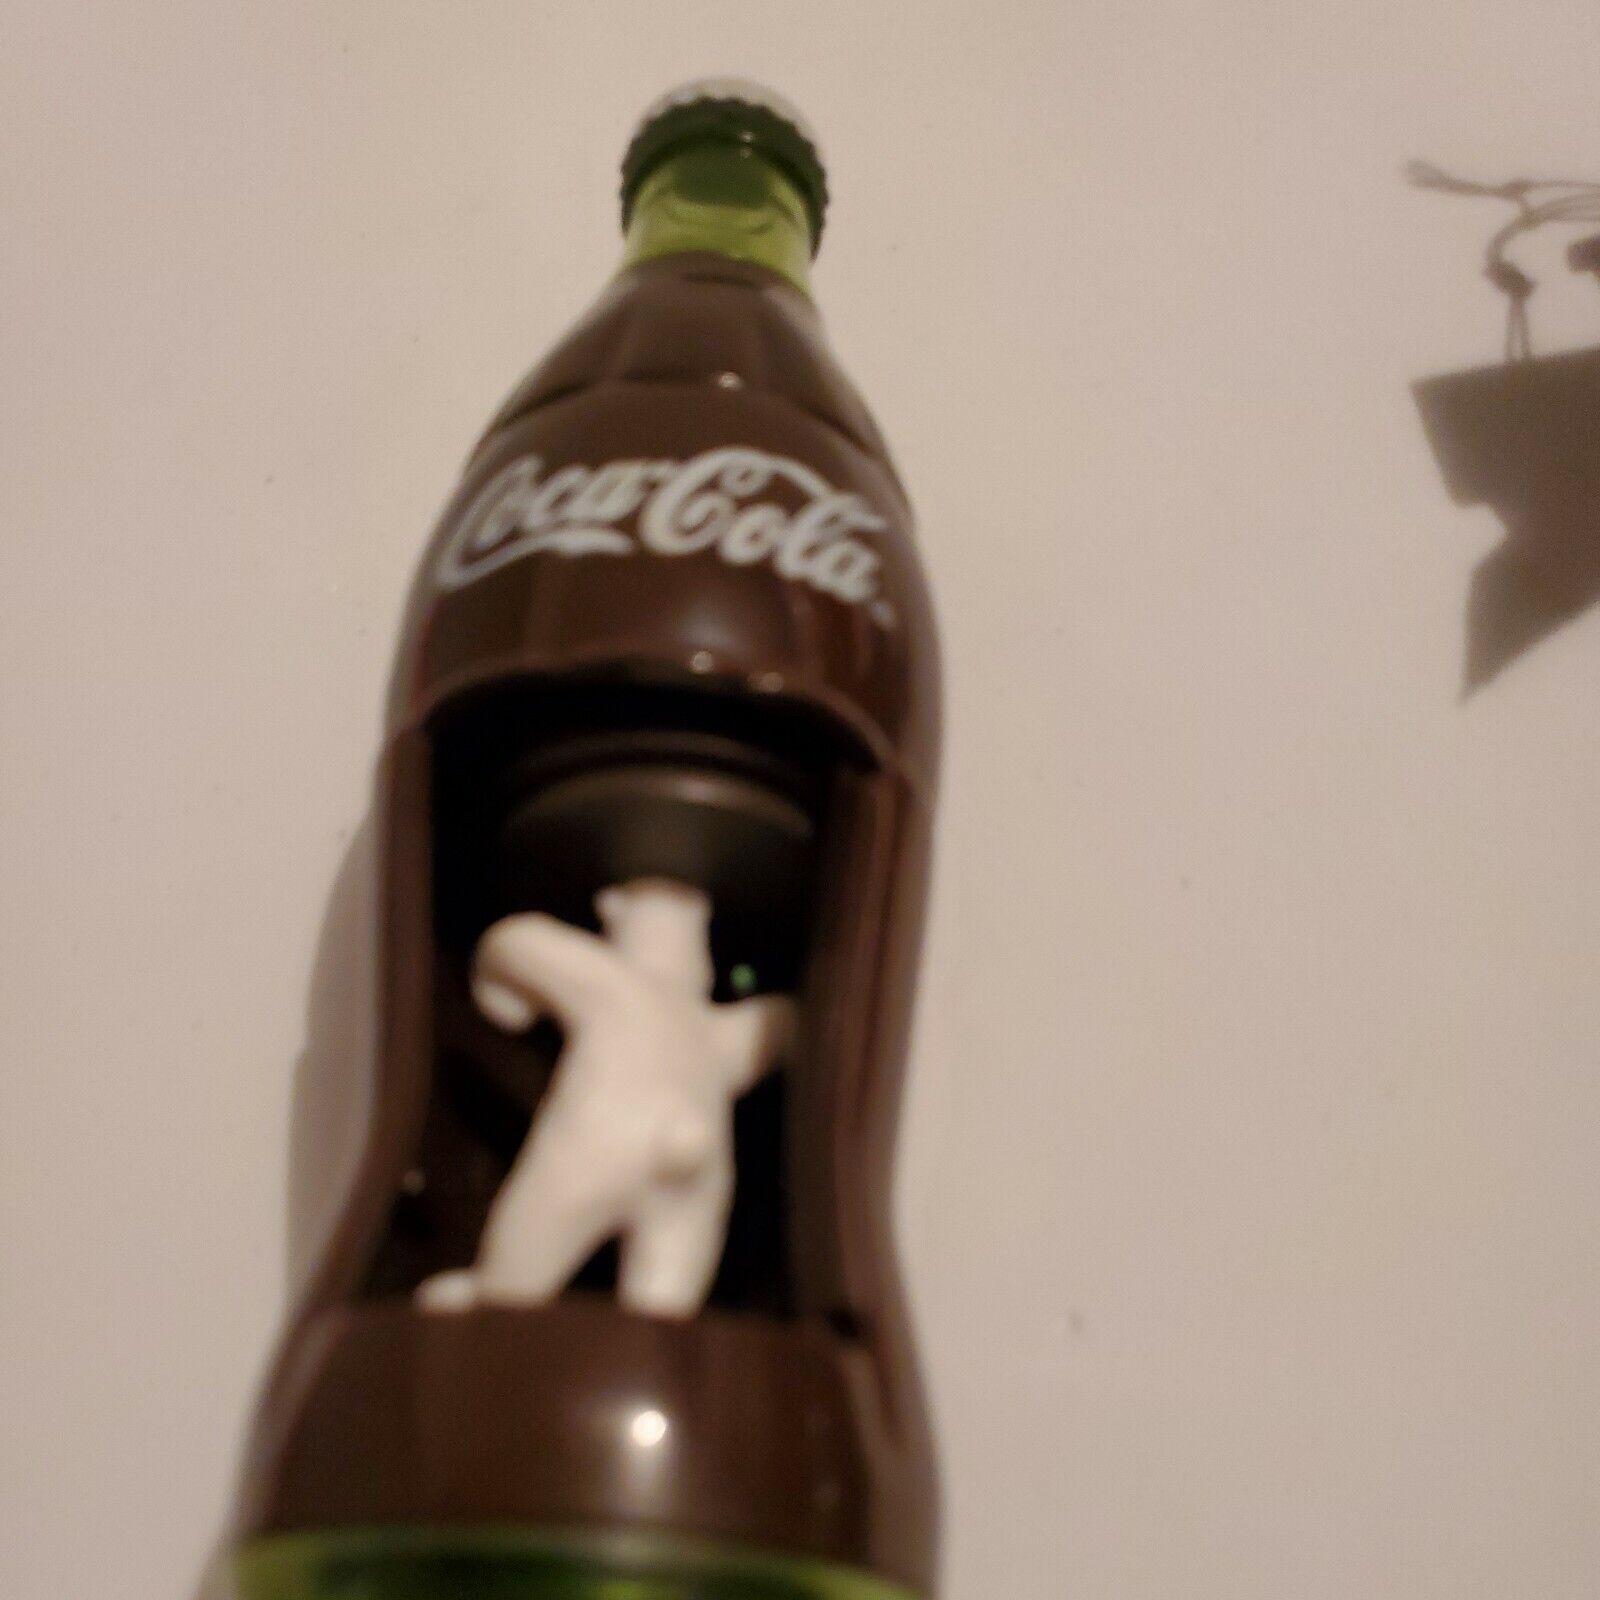 Coca Cola Burger King 2000 Wind Up Coke Bottle with spinning Polar Bear